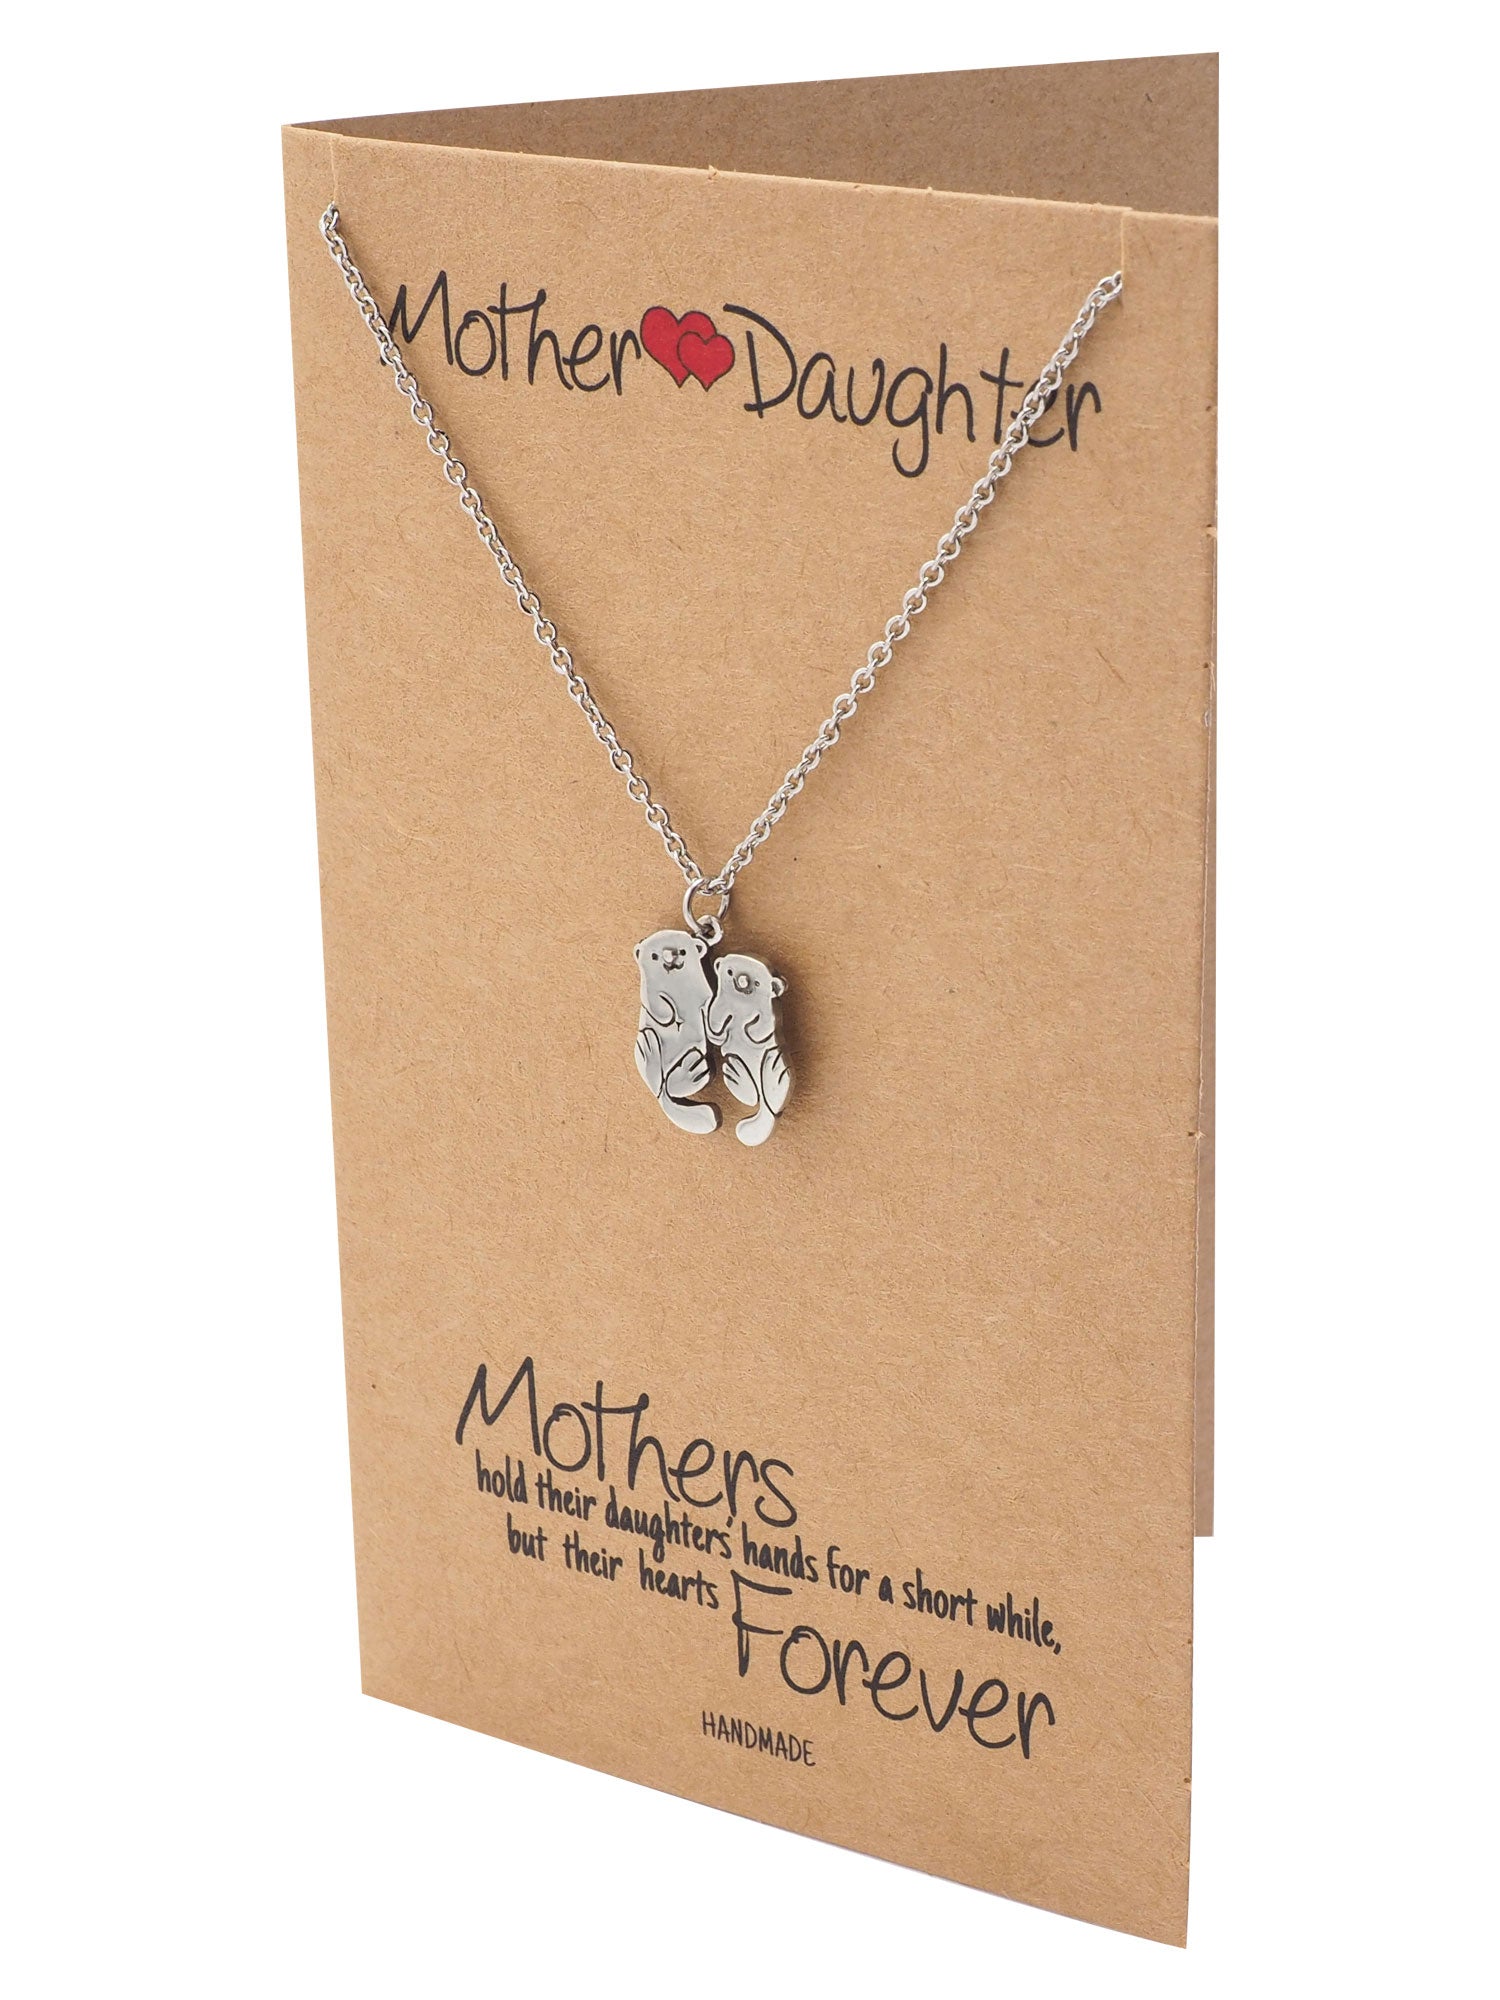 Thank You Mom Gift Necklace, to My Mother Gift Necklace, Mothers Birthday Gift Necklace, Mothers Day Gift Necklace, Gift from Son Daughter - Two Toned